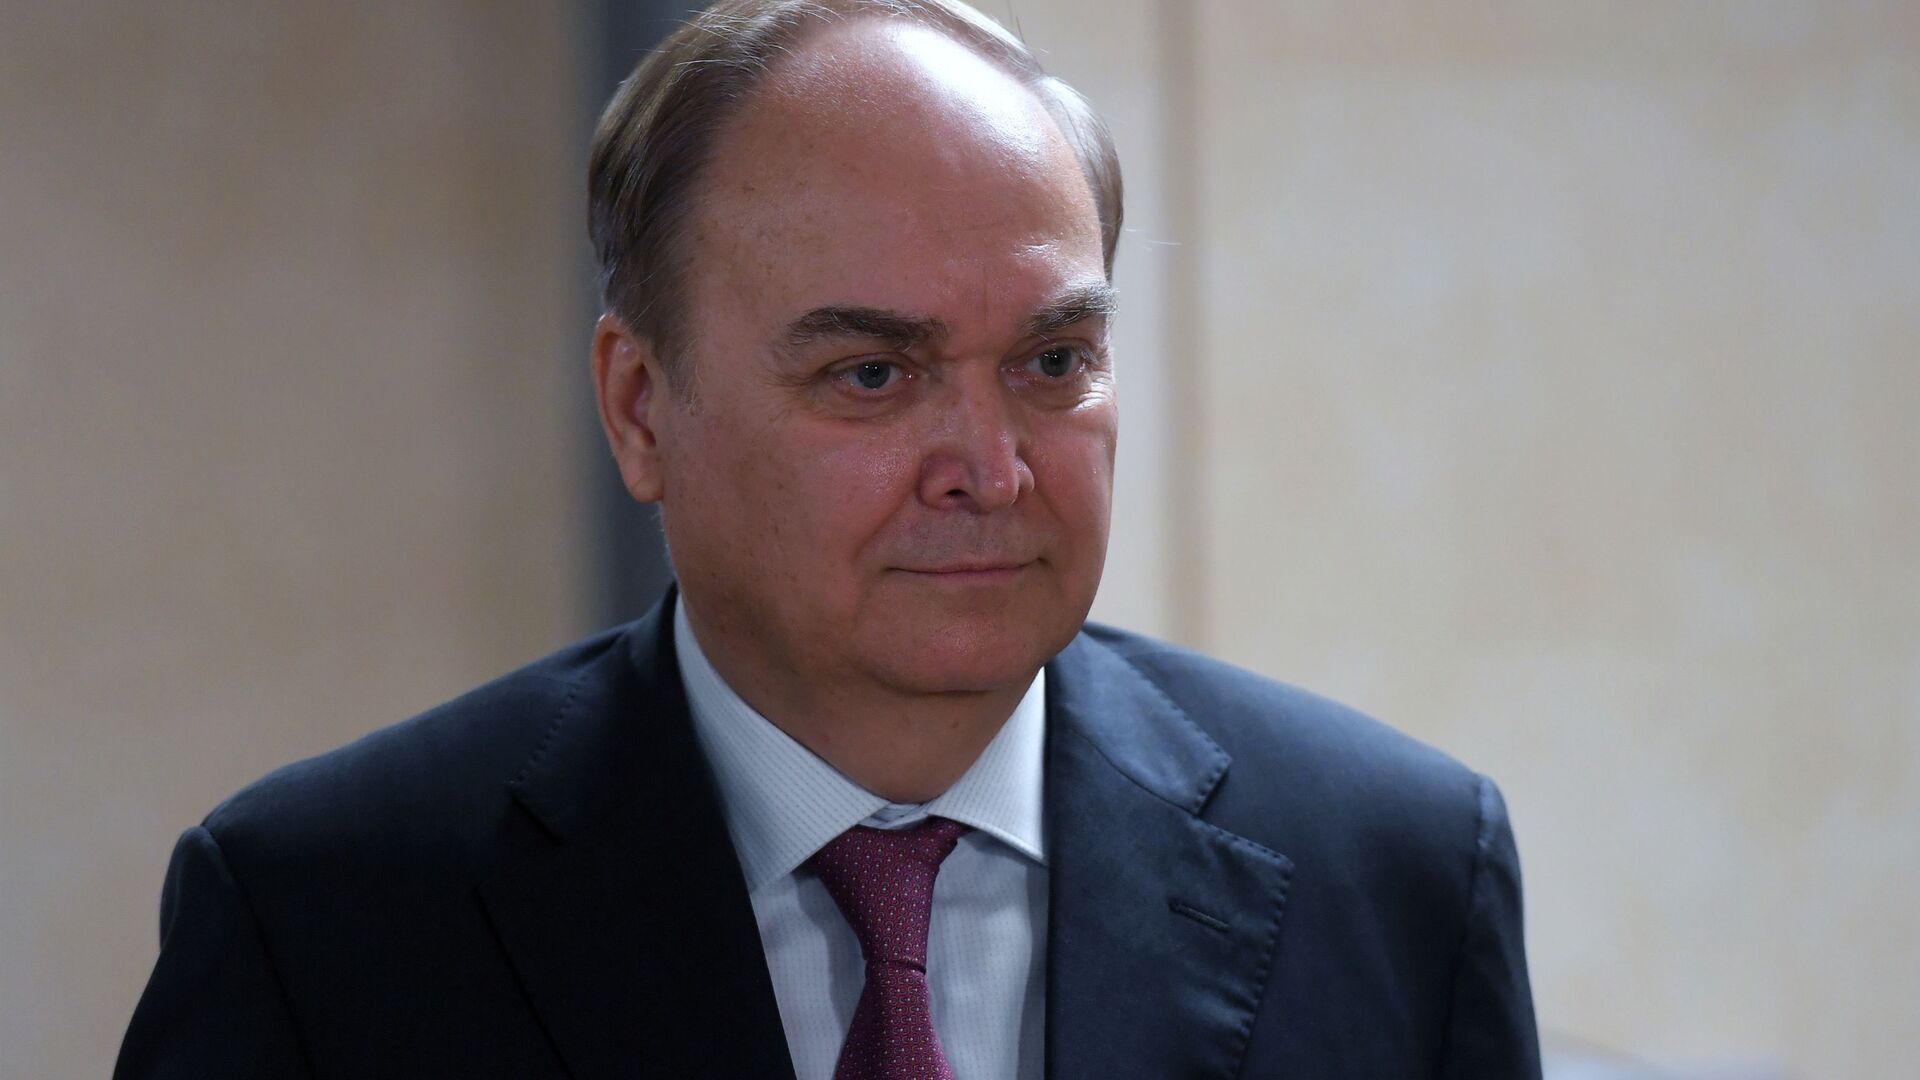 Ambassador Extraordinary and Plenipotentiary of the Russian Federation to the United States of America Anatoly Antonov during a briefing at the State Duma of the Russian Federation in Moscow. - Sputnik International, 1920, 21.07.2021